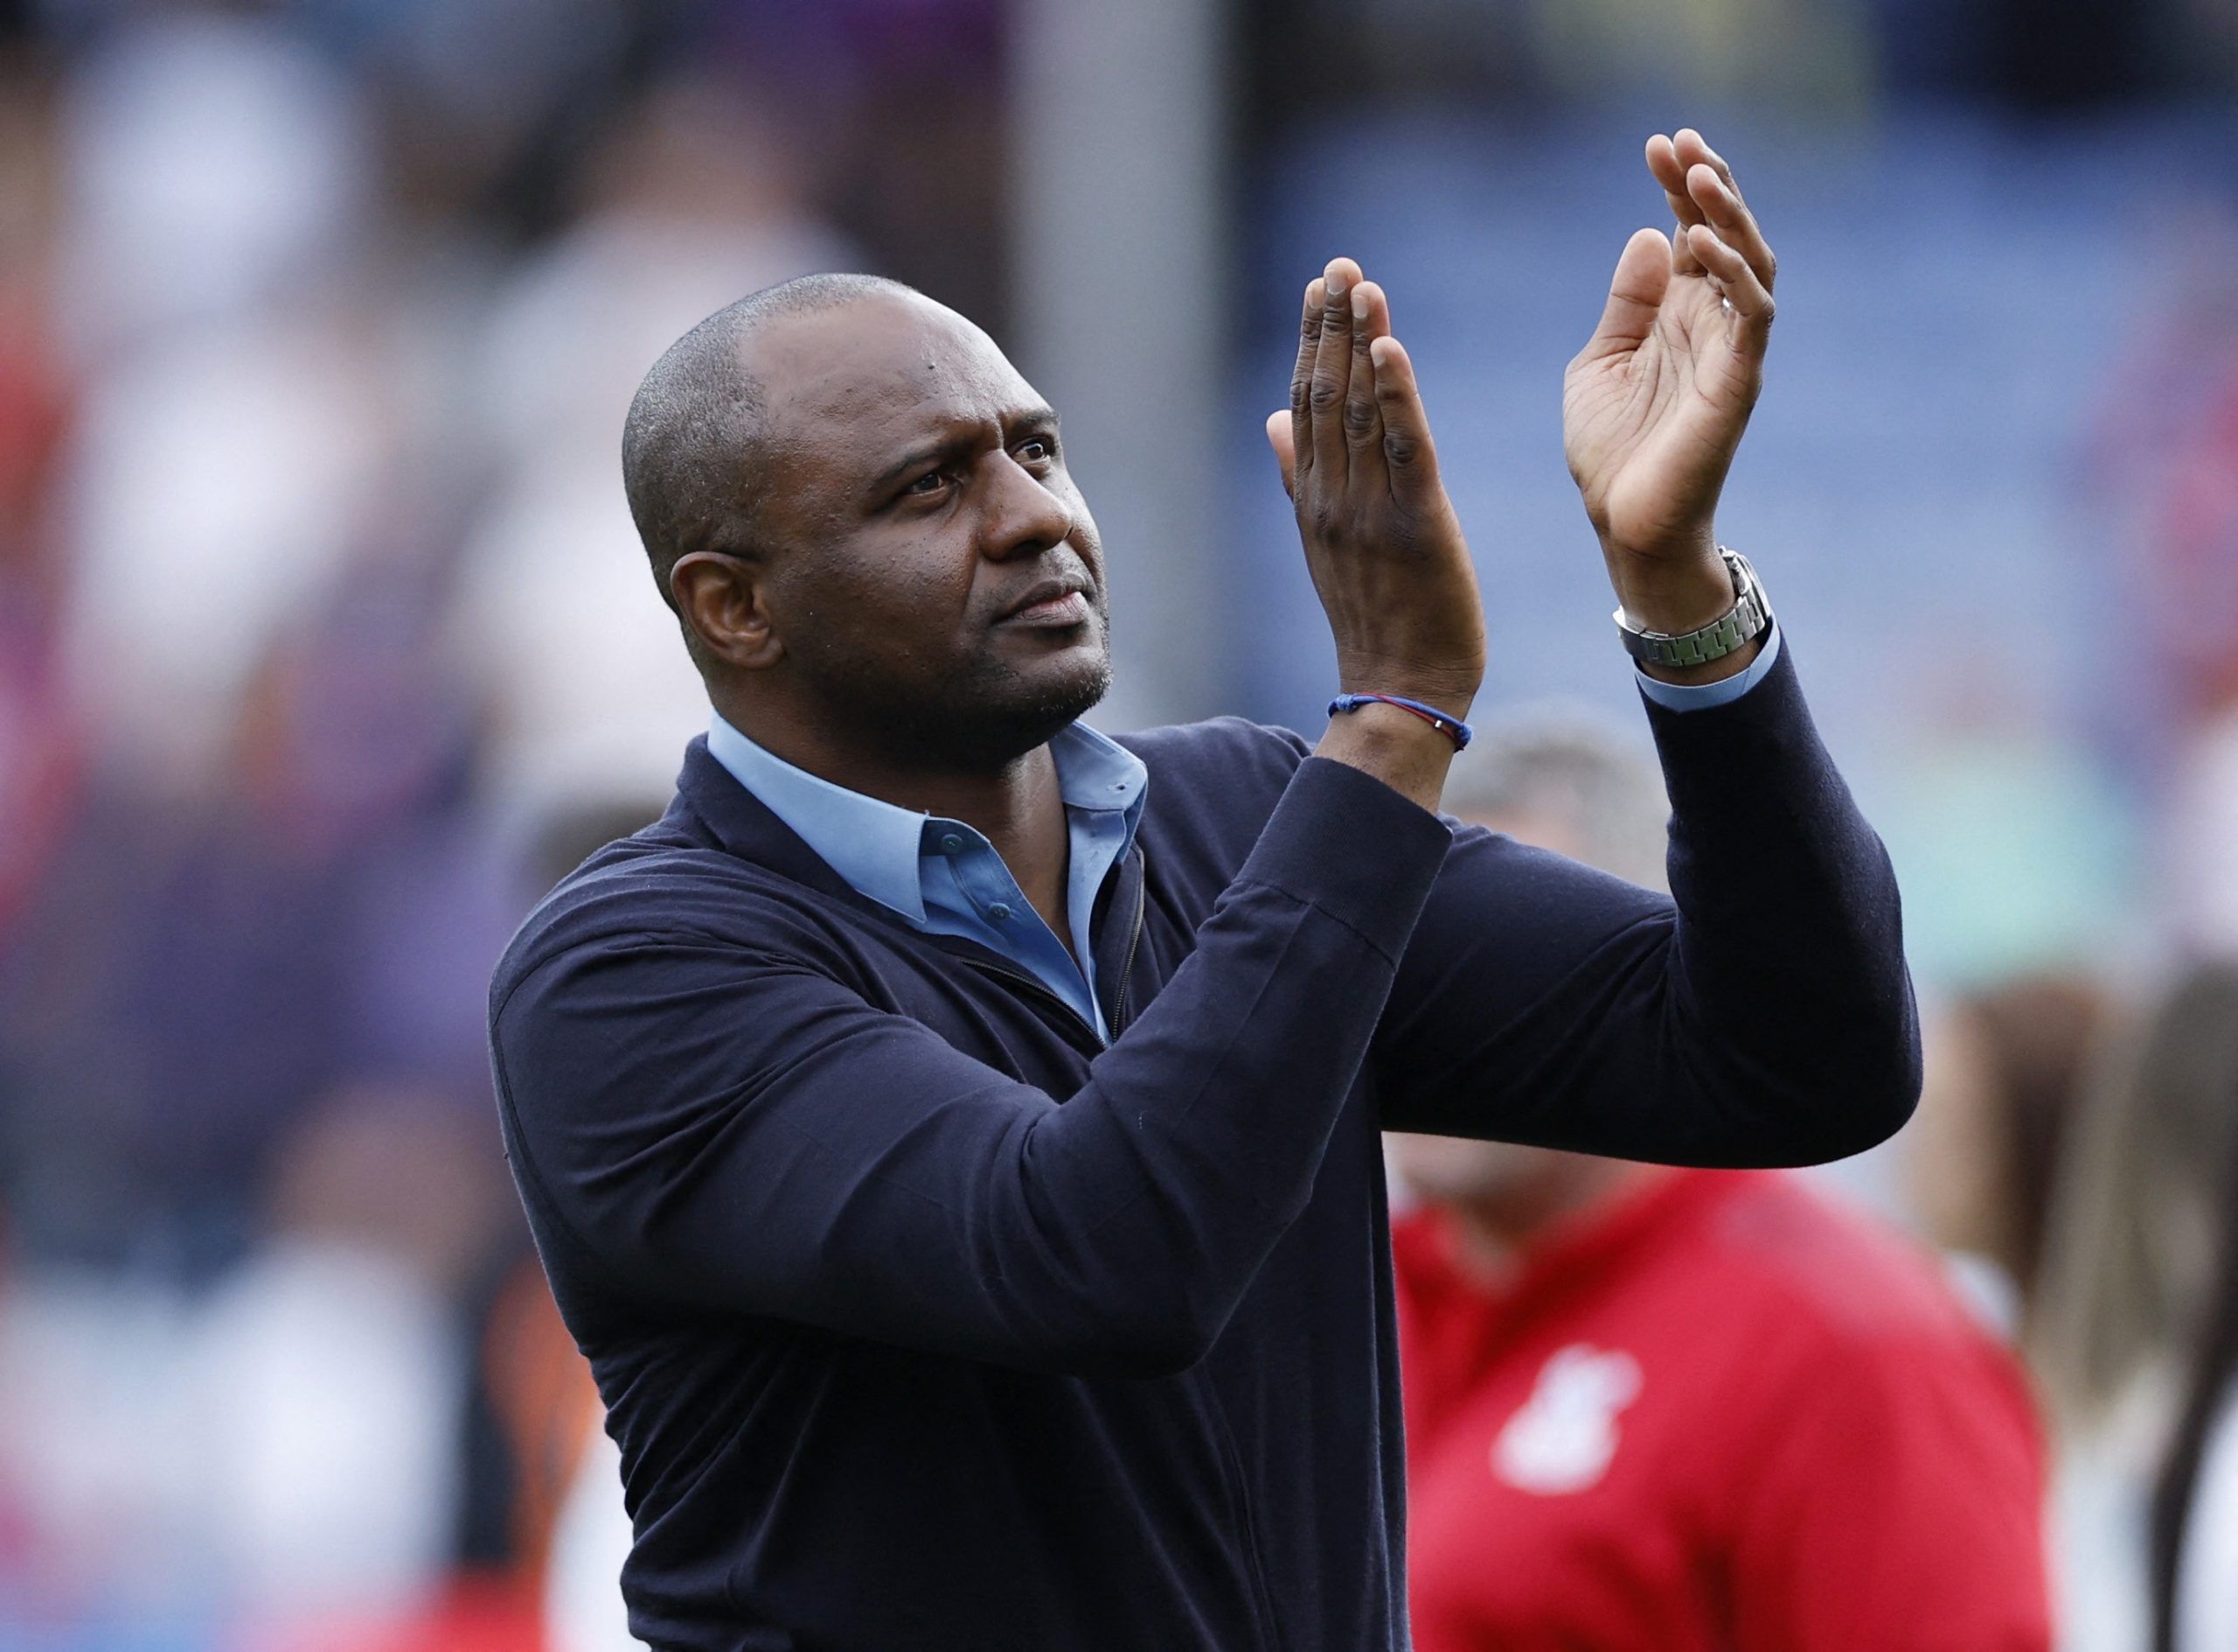 patrick-vieira-crystal-palace-premier-league-jesurun-rak-sakyi-chalkboardSoccer Football - Premier League - Crystal Palace v Manchester United - Selhurst Park, London, Britain - May 22, 2022 Crystal Palace manager Patrick Vieira acknowledges fans during the lap of appreciation after the match Action Images via Reuters/John Sibley EDITORIAL USE ONLY. No use with unauthorized audio, video, data, fixture lists, club/league logos or 'live' services. Online in-match use limited to 75 images, no video